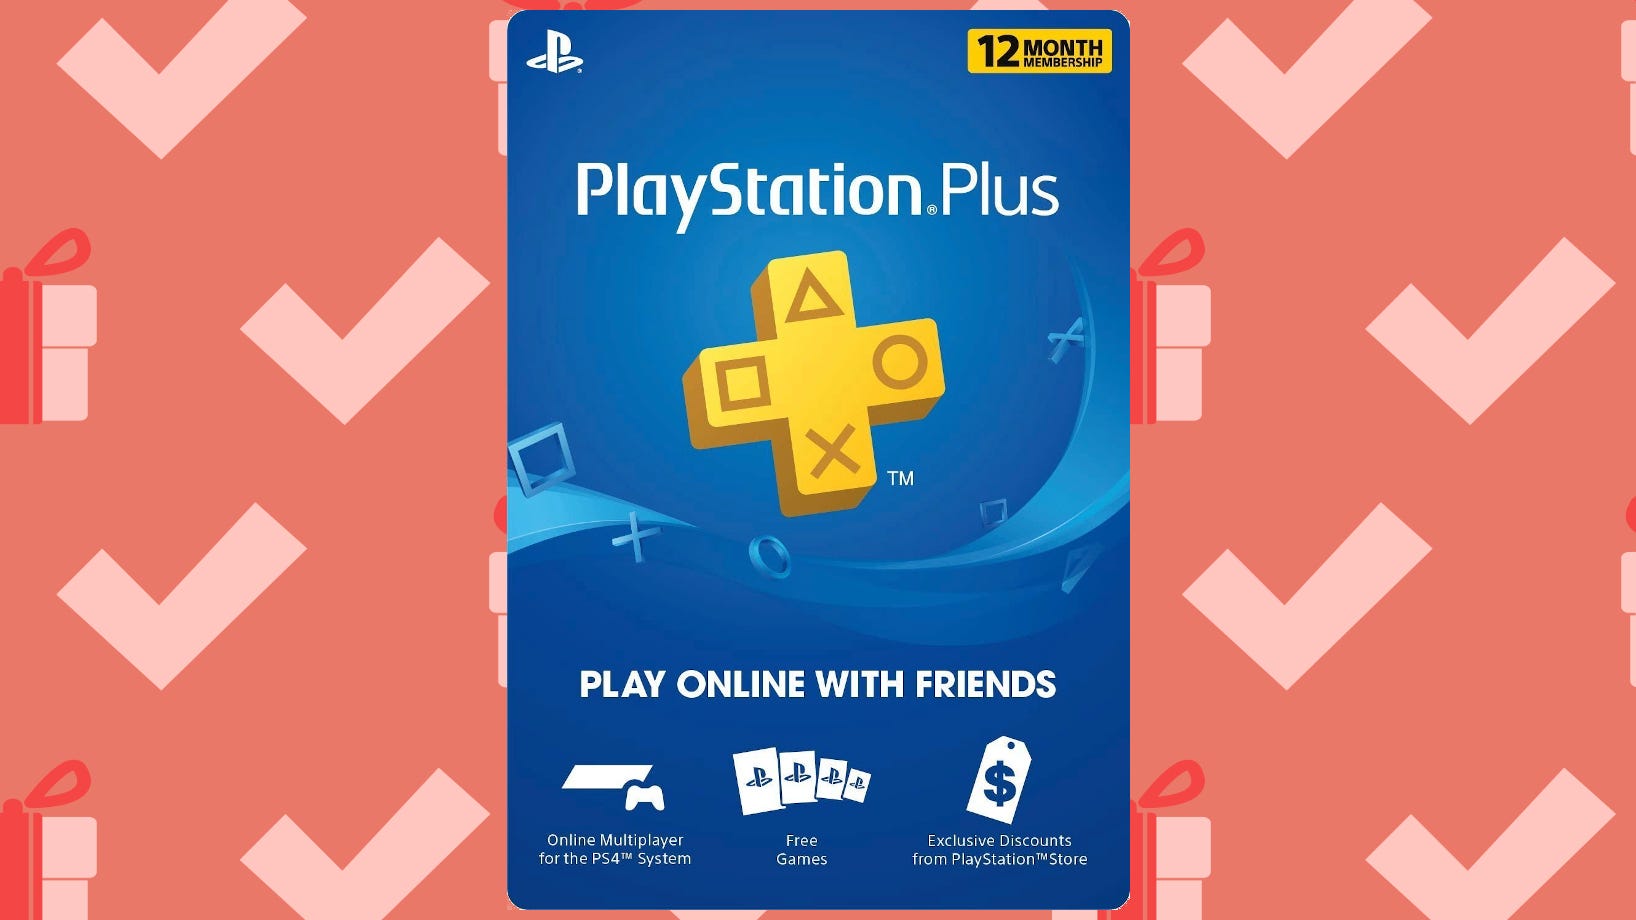 playstation plus yearly cost